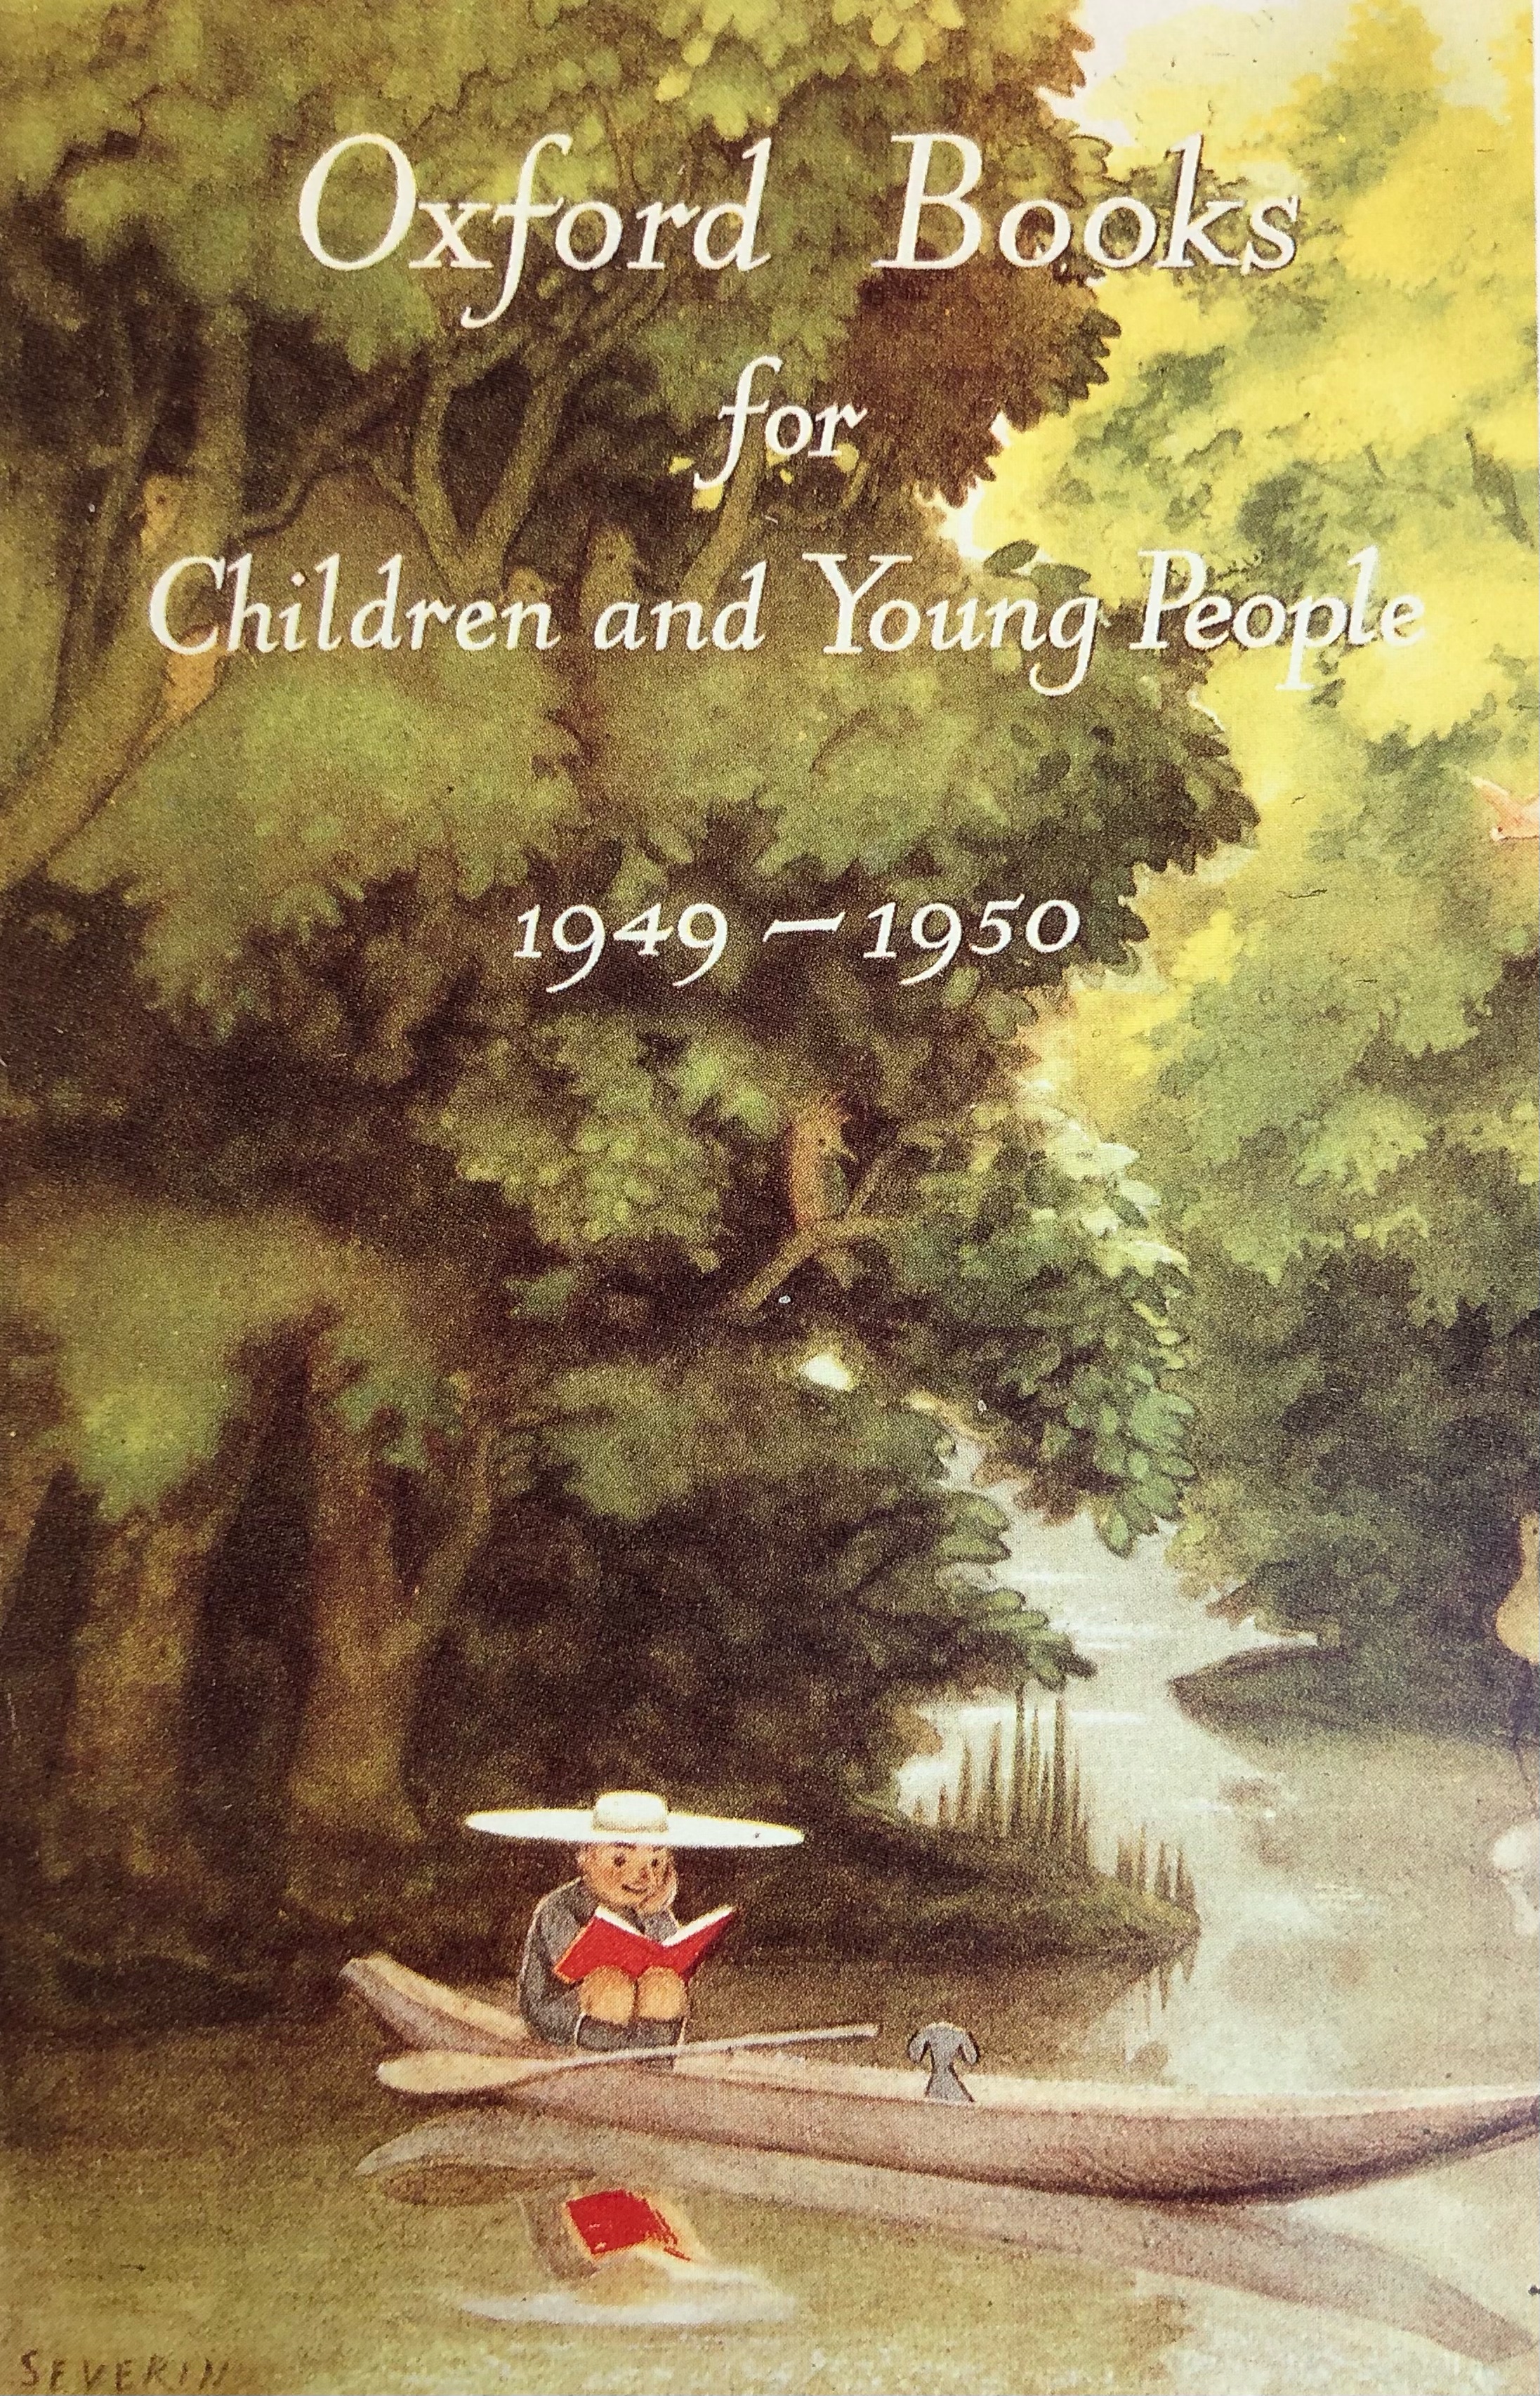 For Children and Young People 1949-1950